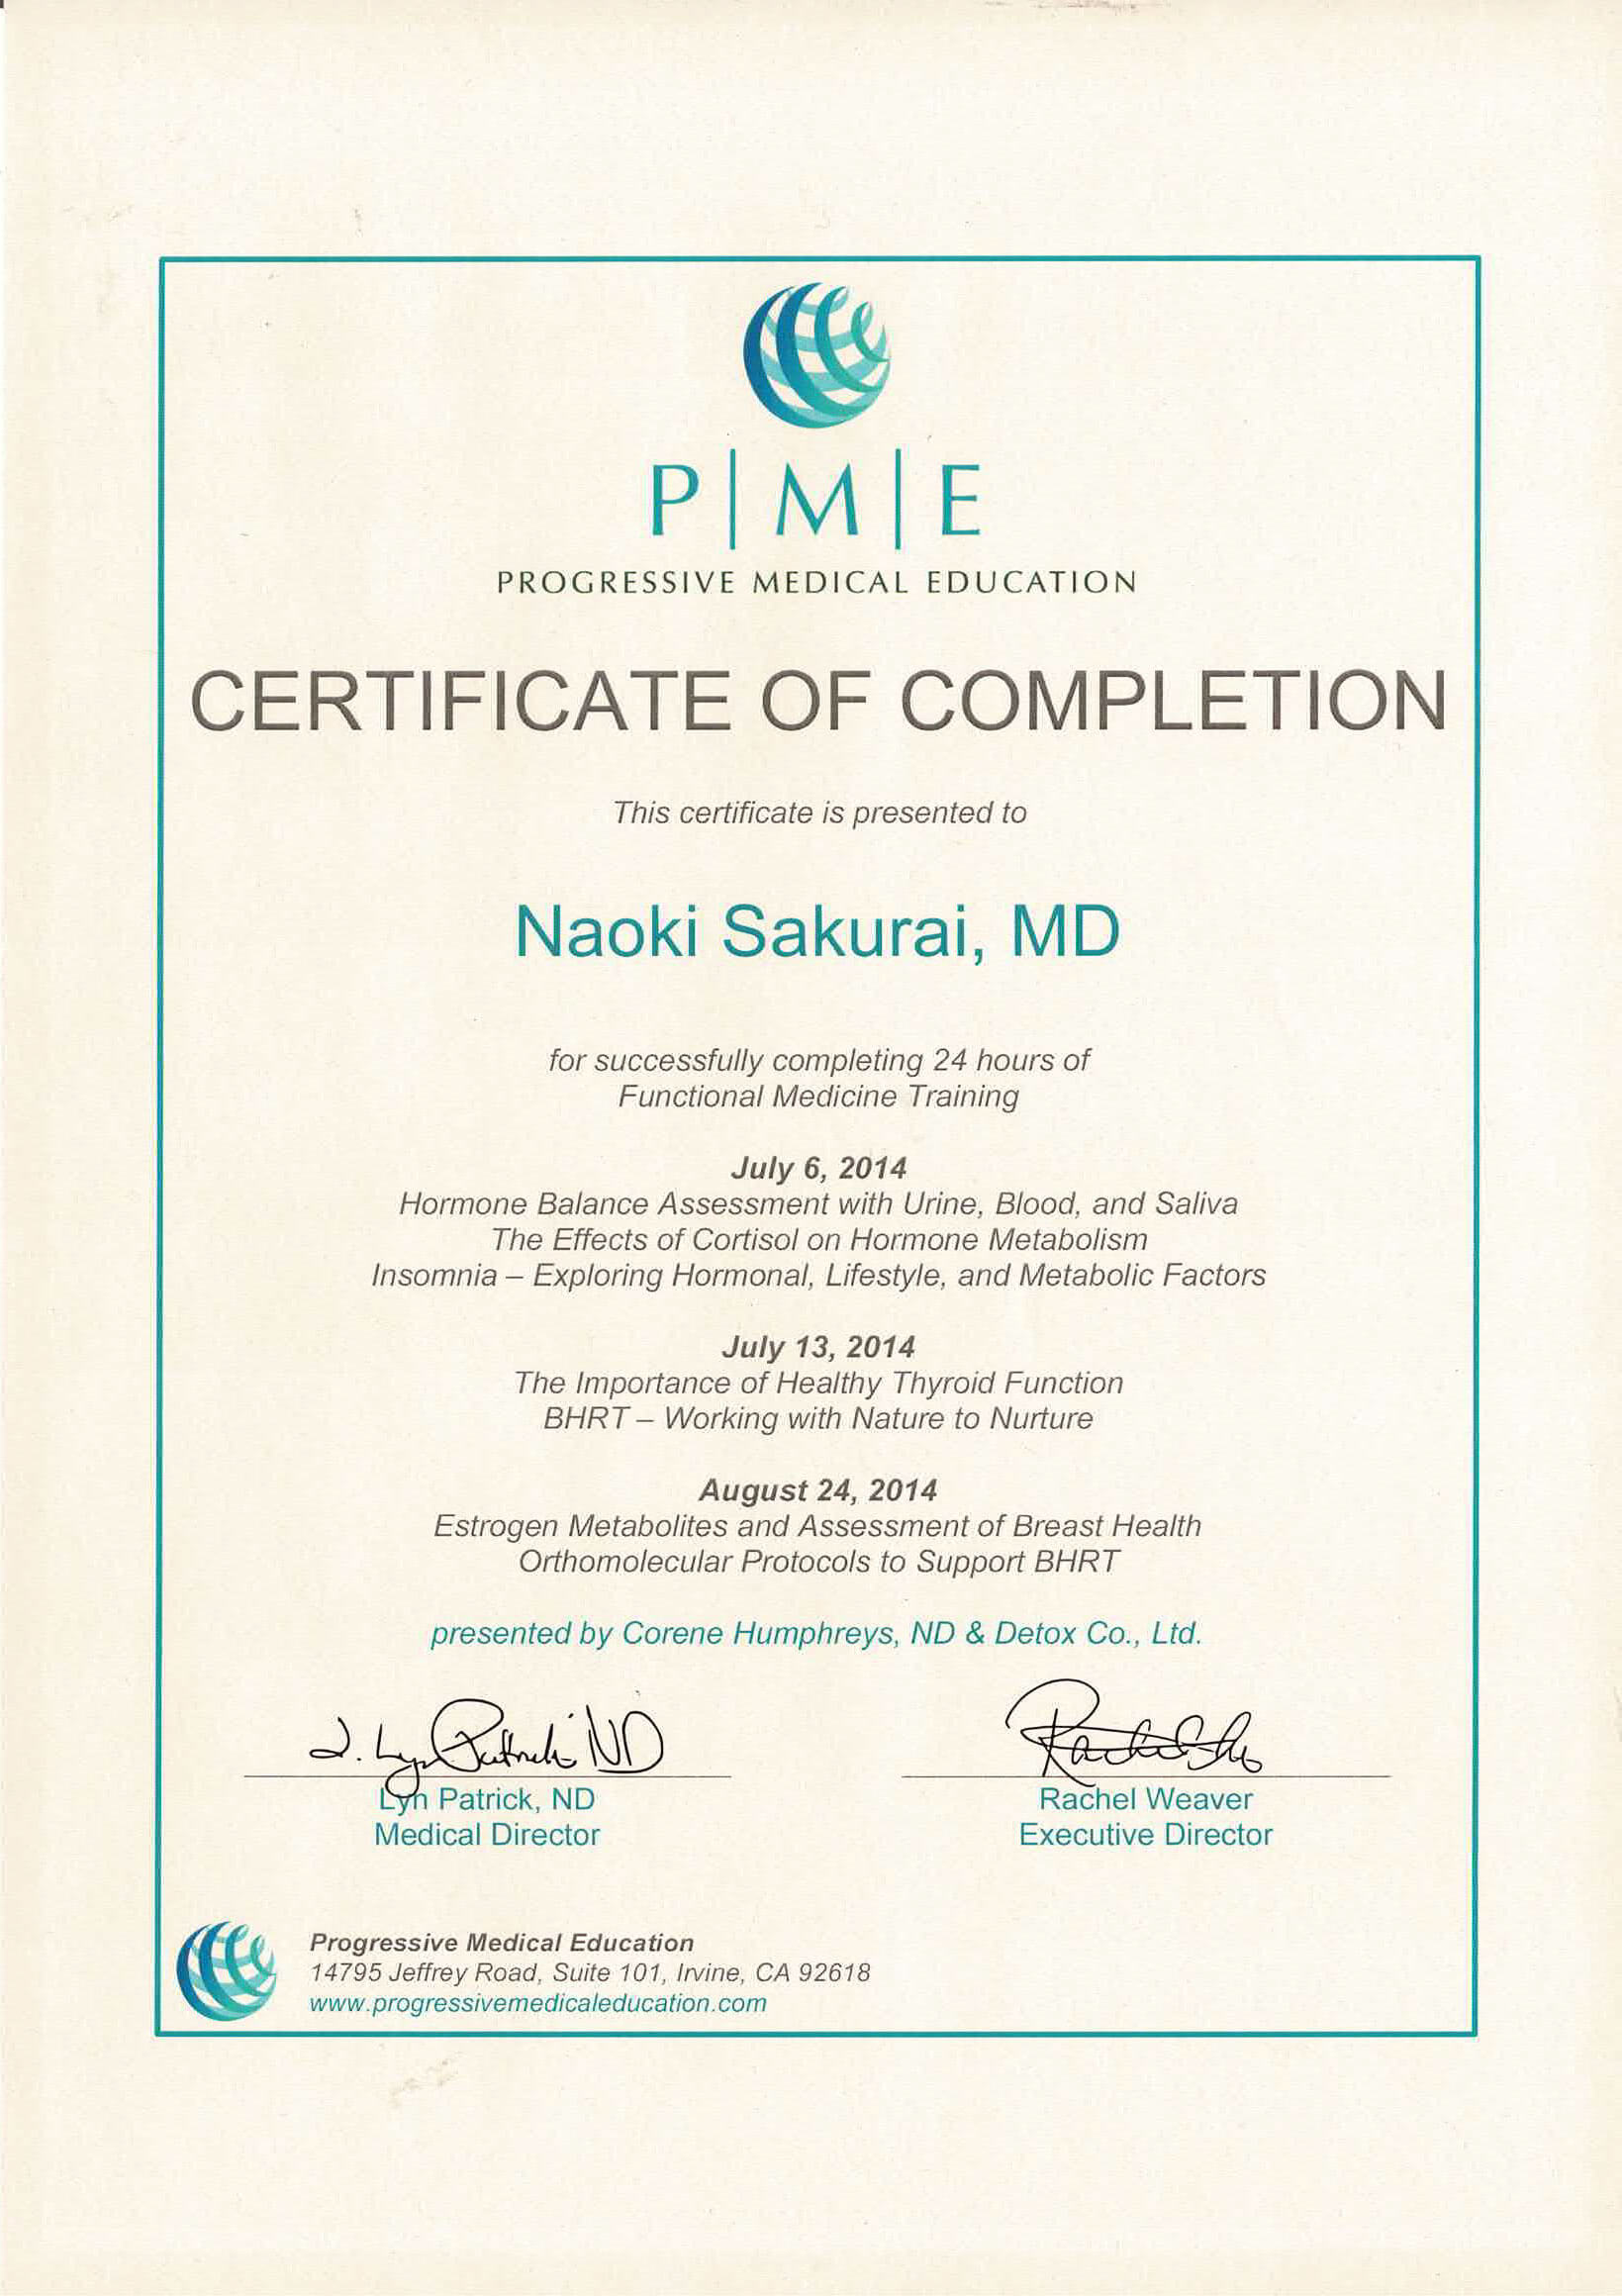 PME CERTIFICATE OF COMPLETION